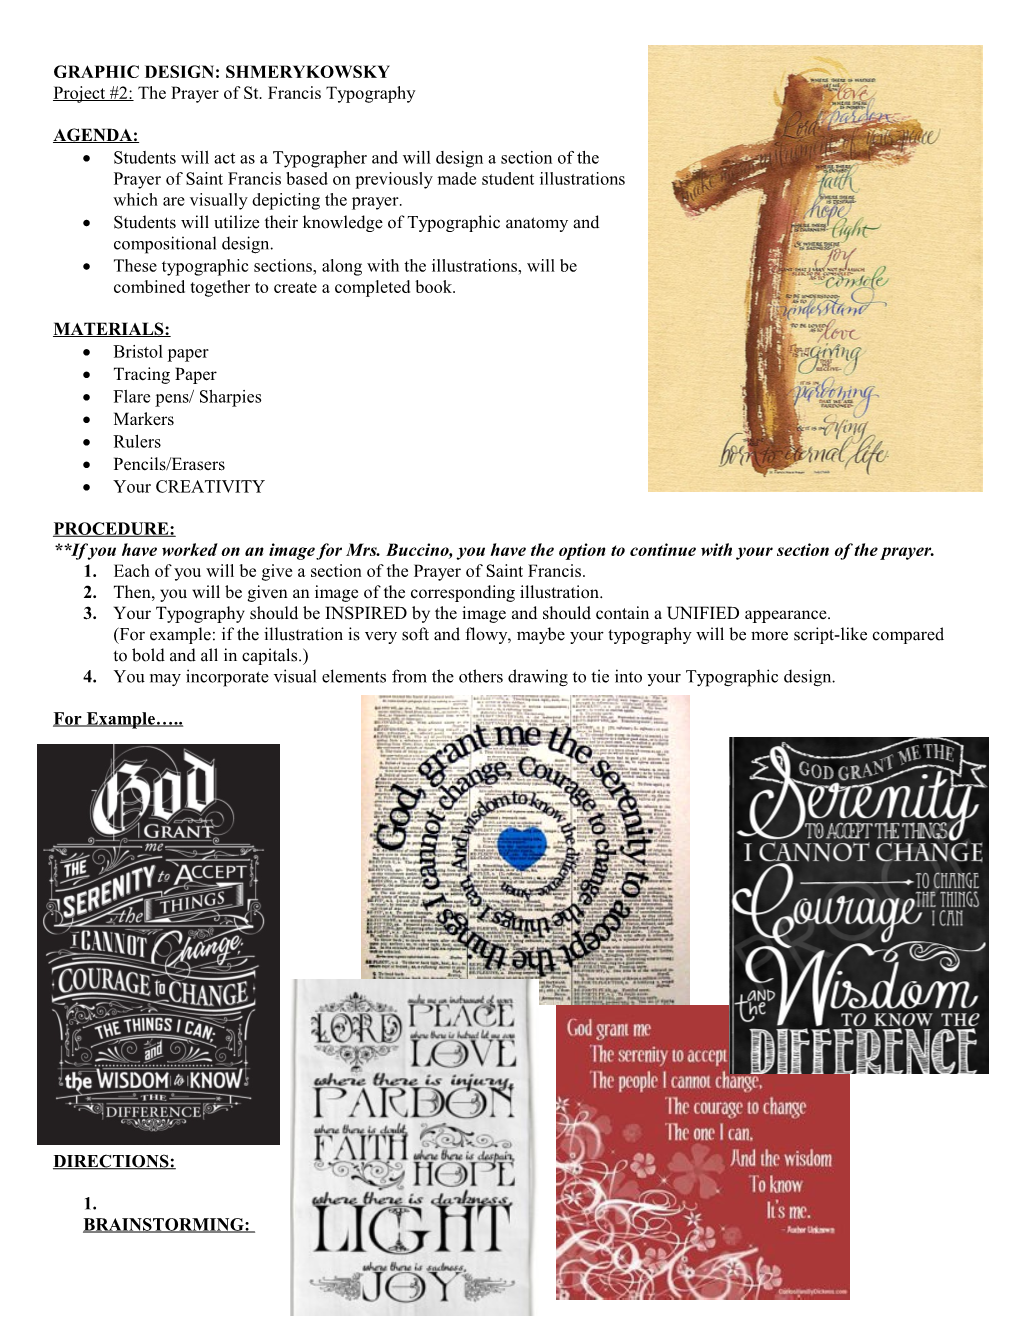 Project #2: the Prayer of St. Francis Typography